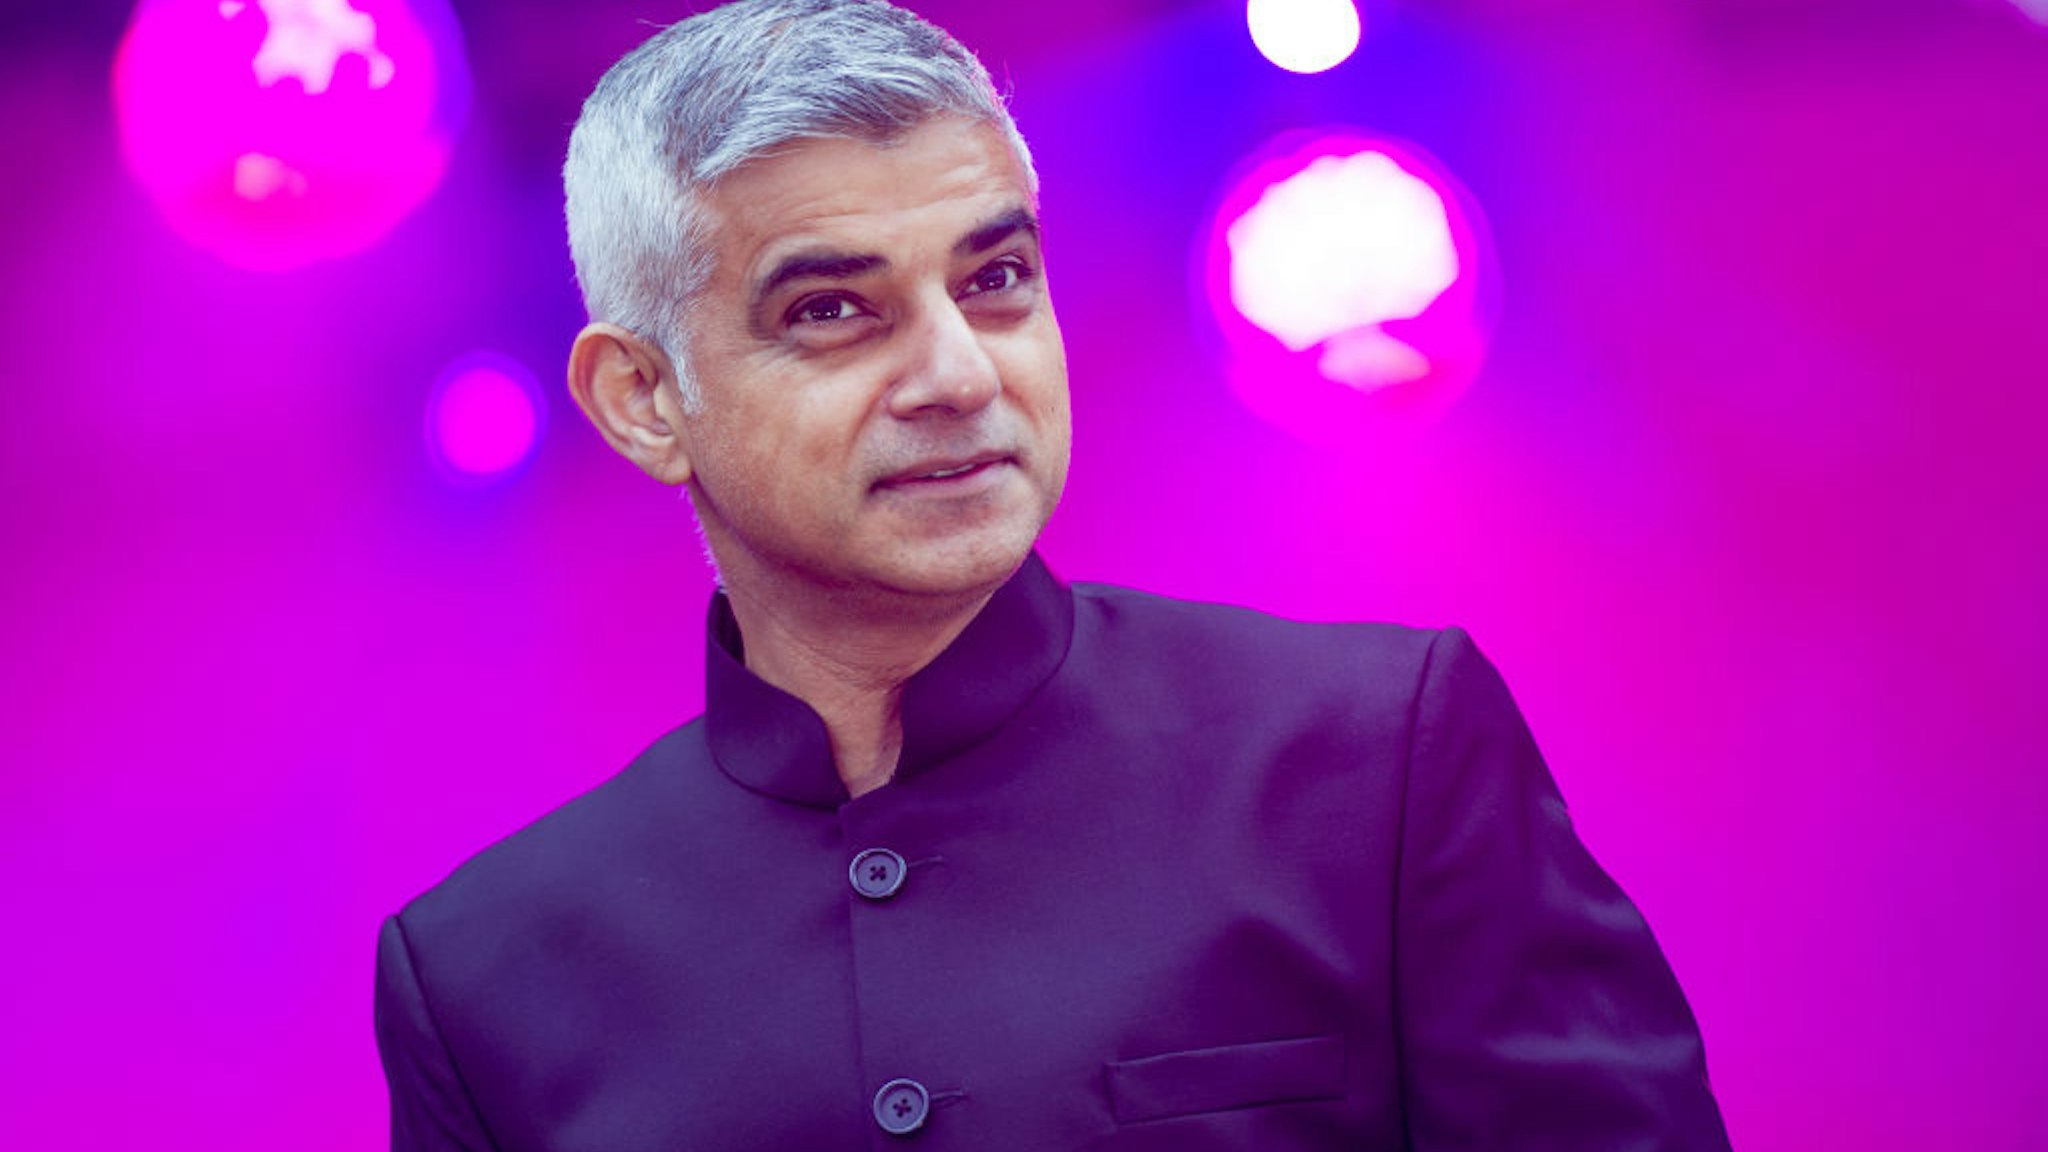 Sadiq Khan, Mayor of London opens The London Mayor's Diwali 2019 Celebrations, the festival of victory of light over darkness, good over evil and knowledge over ignorance at Trafalgar Squareuare on November 3, 2019 in London, England.